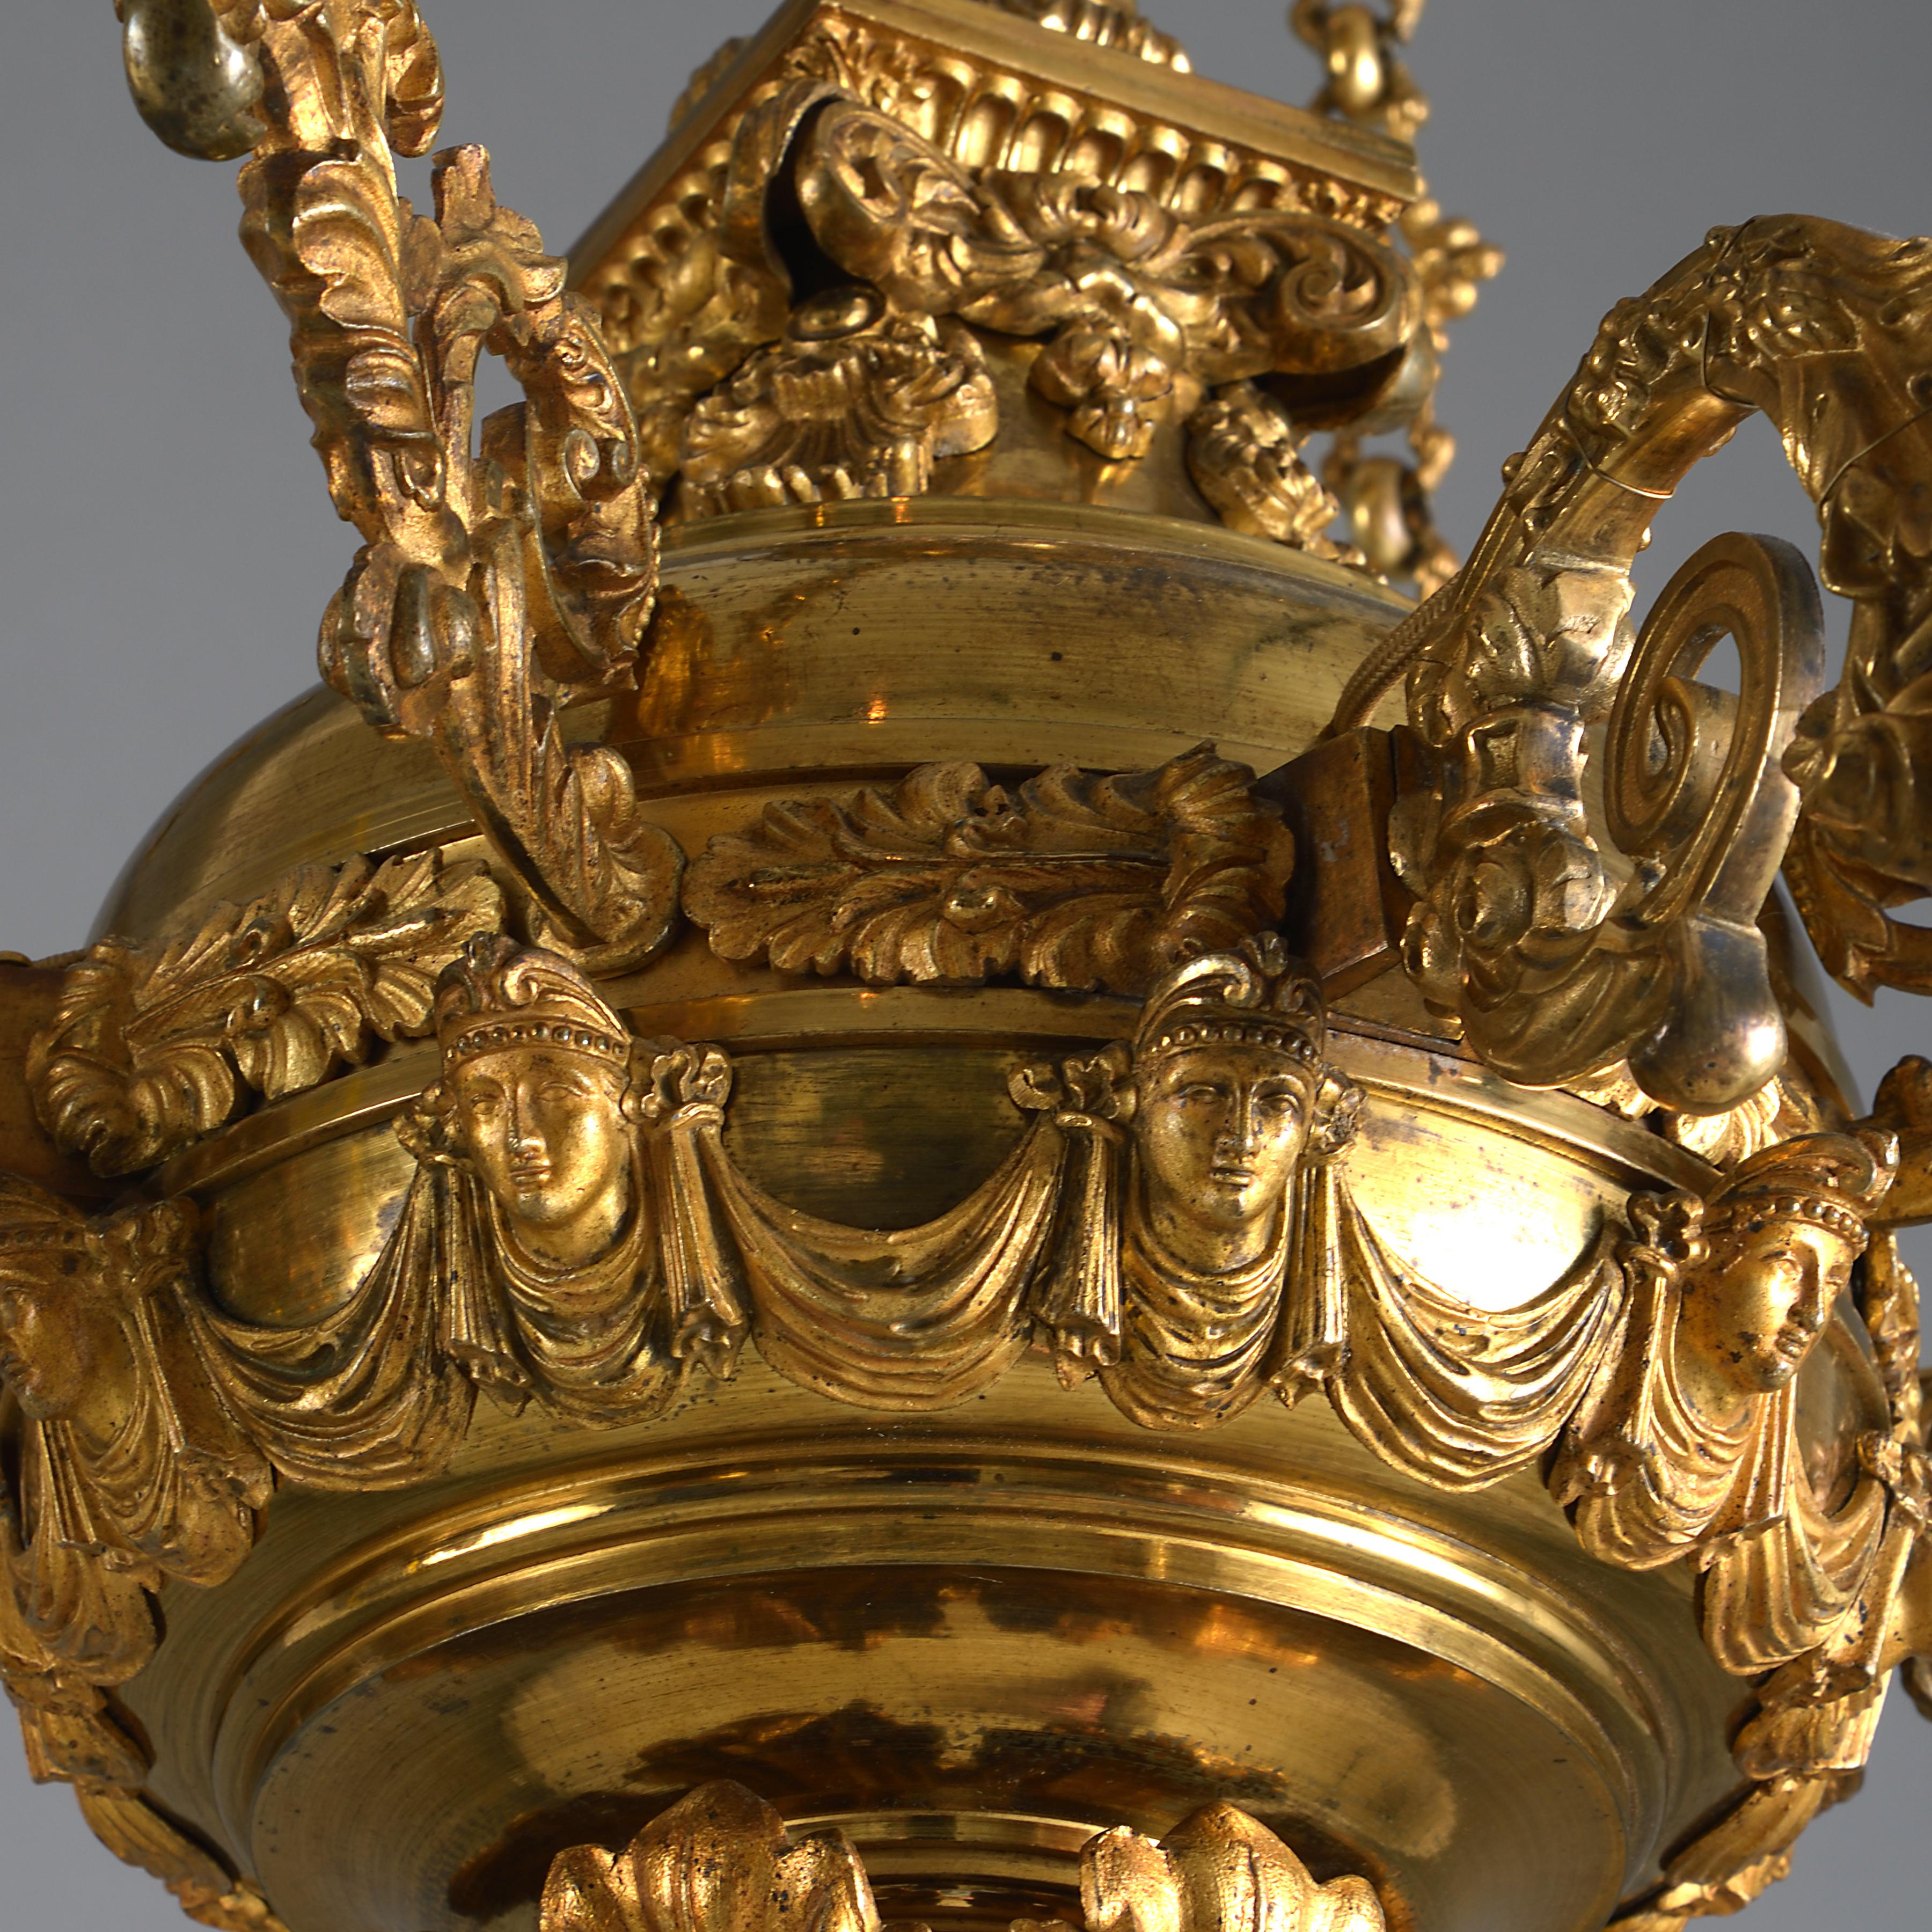 English Gilt-Brass Four-Branch Chandelier by Messenger & Sons, circa 1835